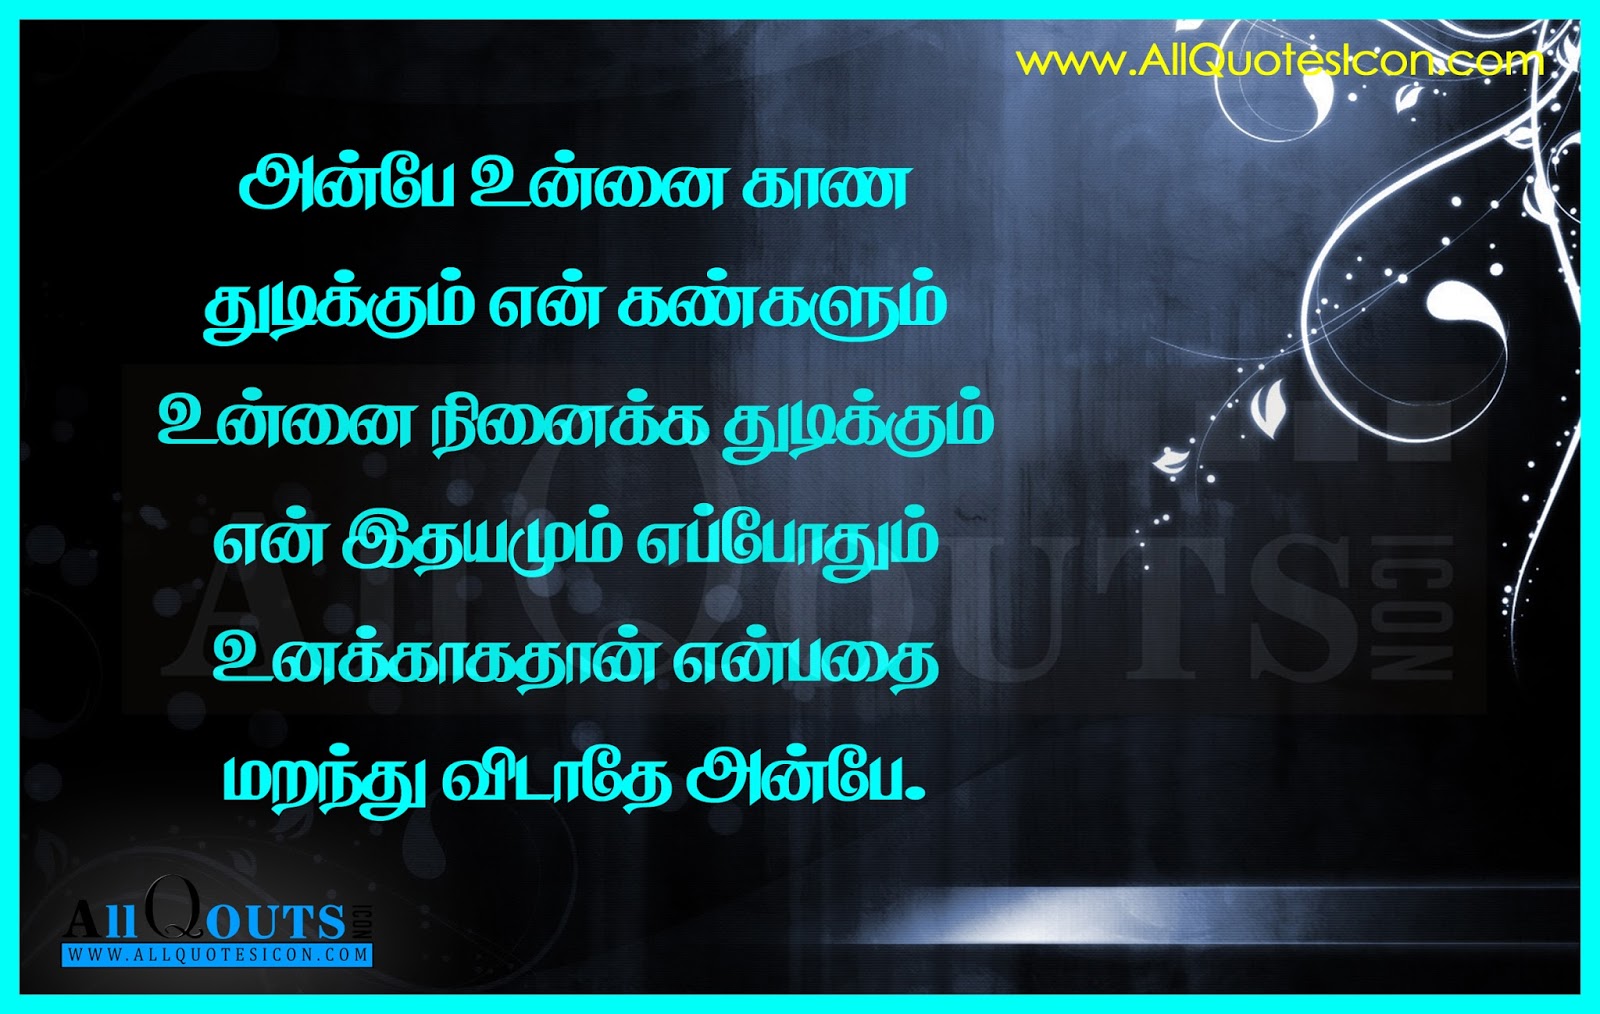 Best Life Quotes In Tamil Hd Wallpapers Inspirational - Life Best Quotes In  Tamil - 1600x1014 Wallpaper 